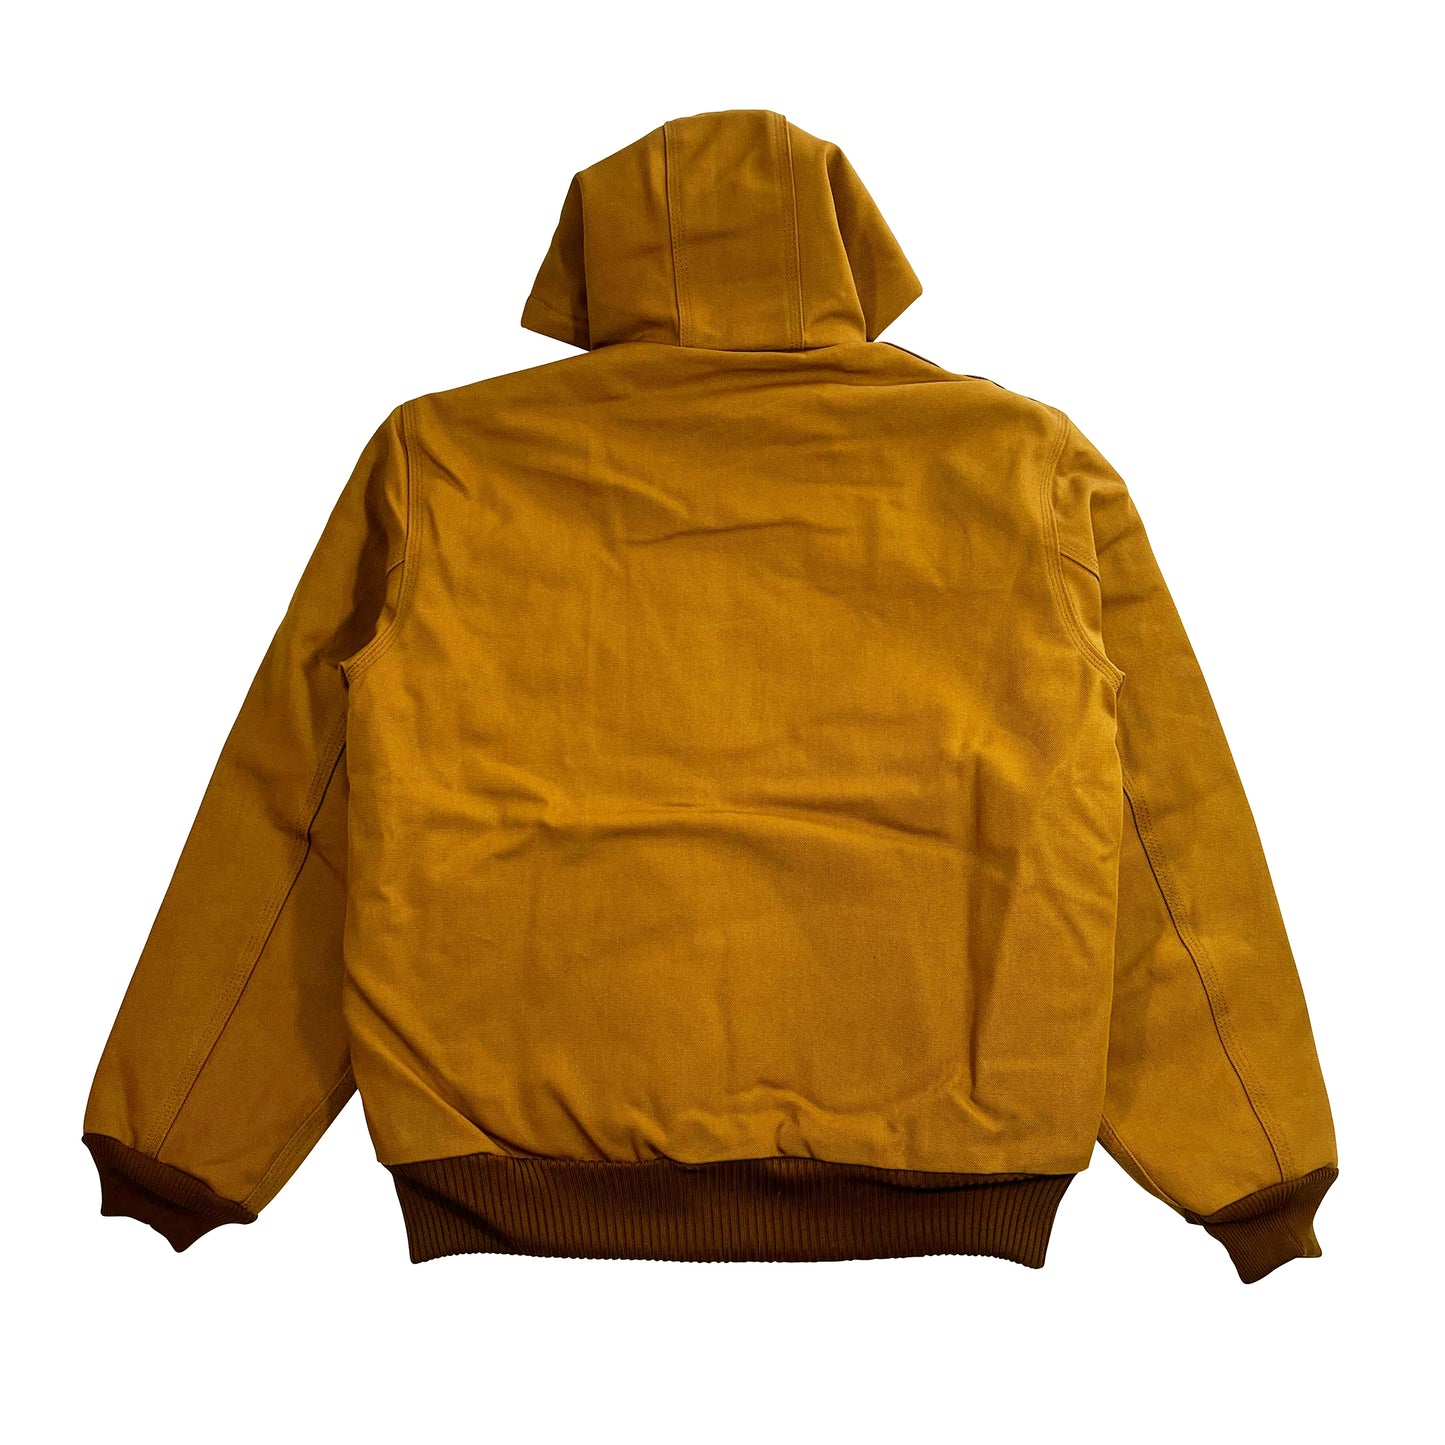 VINYL7 RECORDS Made in USA Carhartt Active Jacket - BROWN